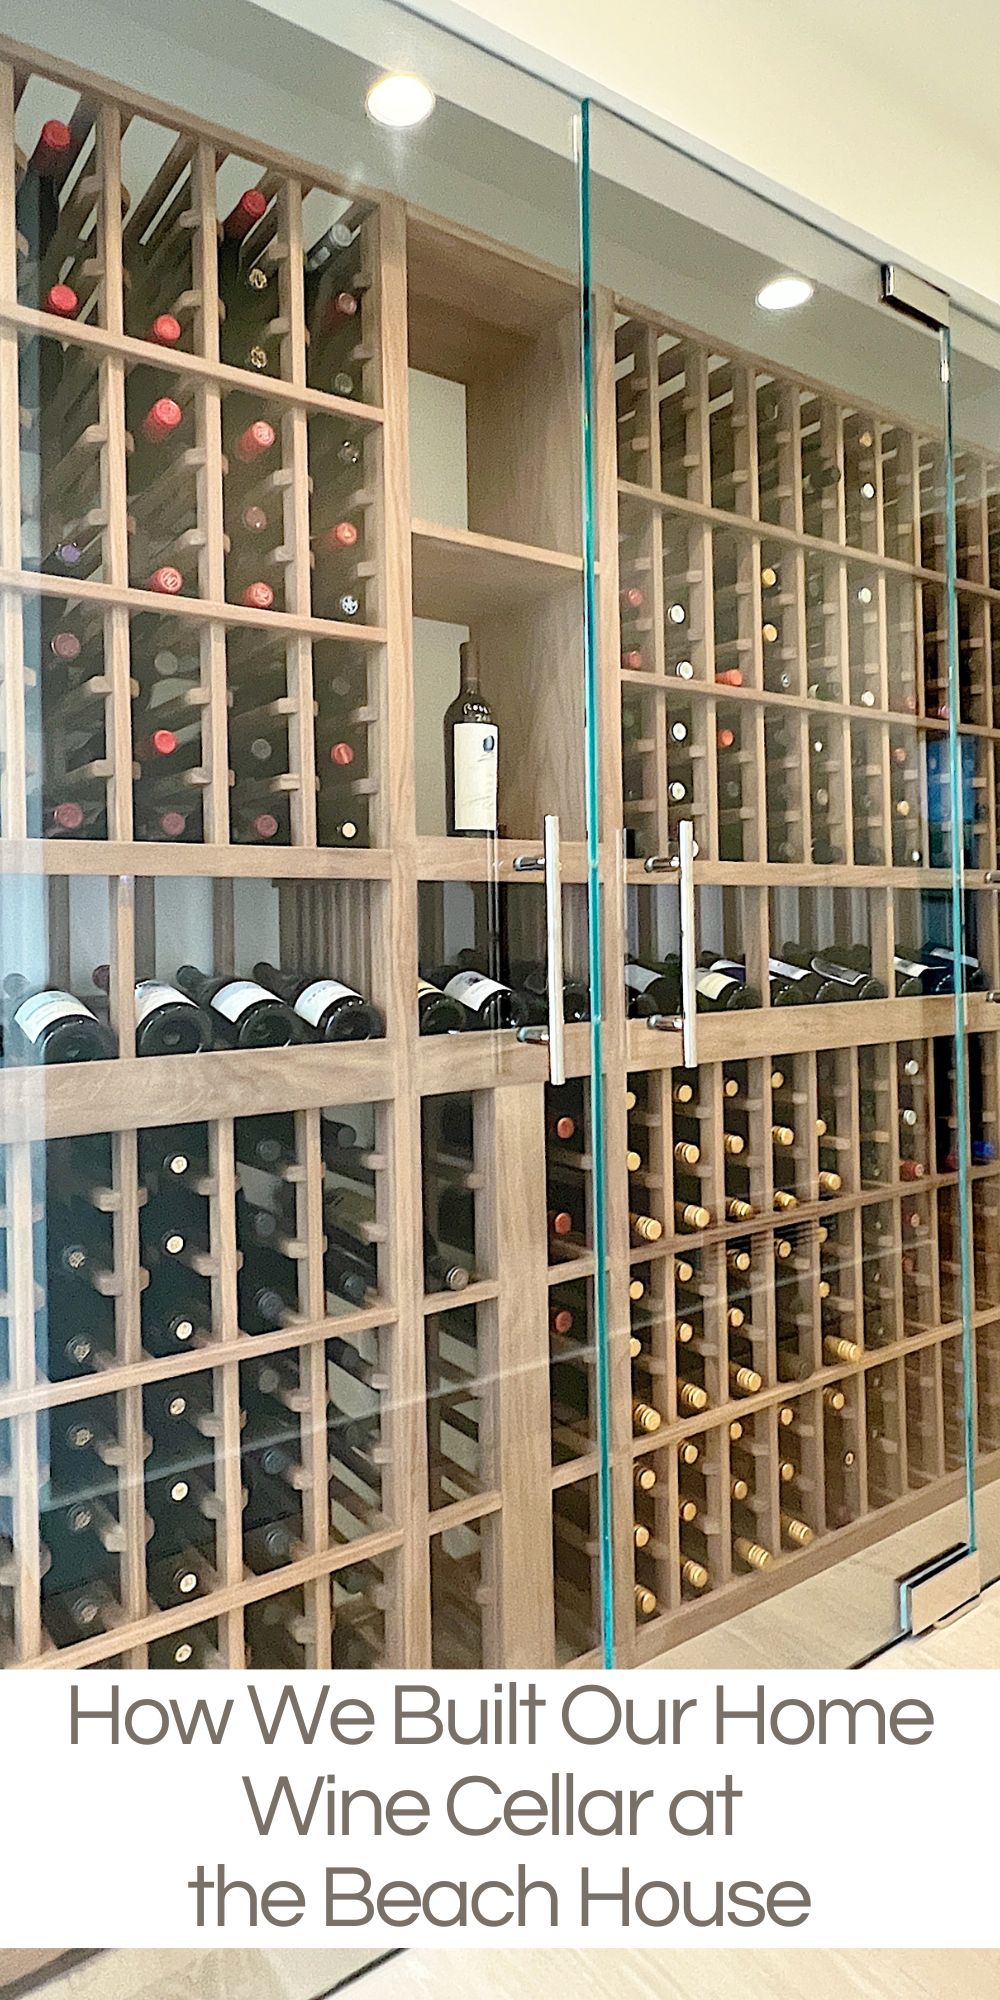 Today I am sharing how we built and installed our home wine cellar in a hallway during a remodel at our beach house. We love it.